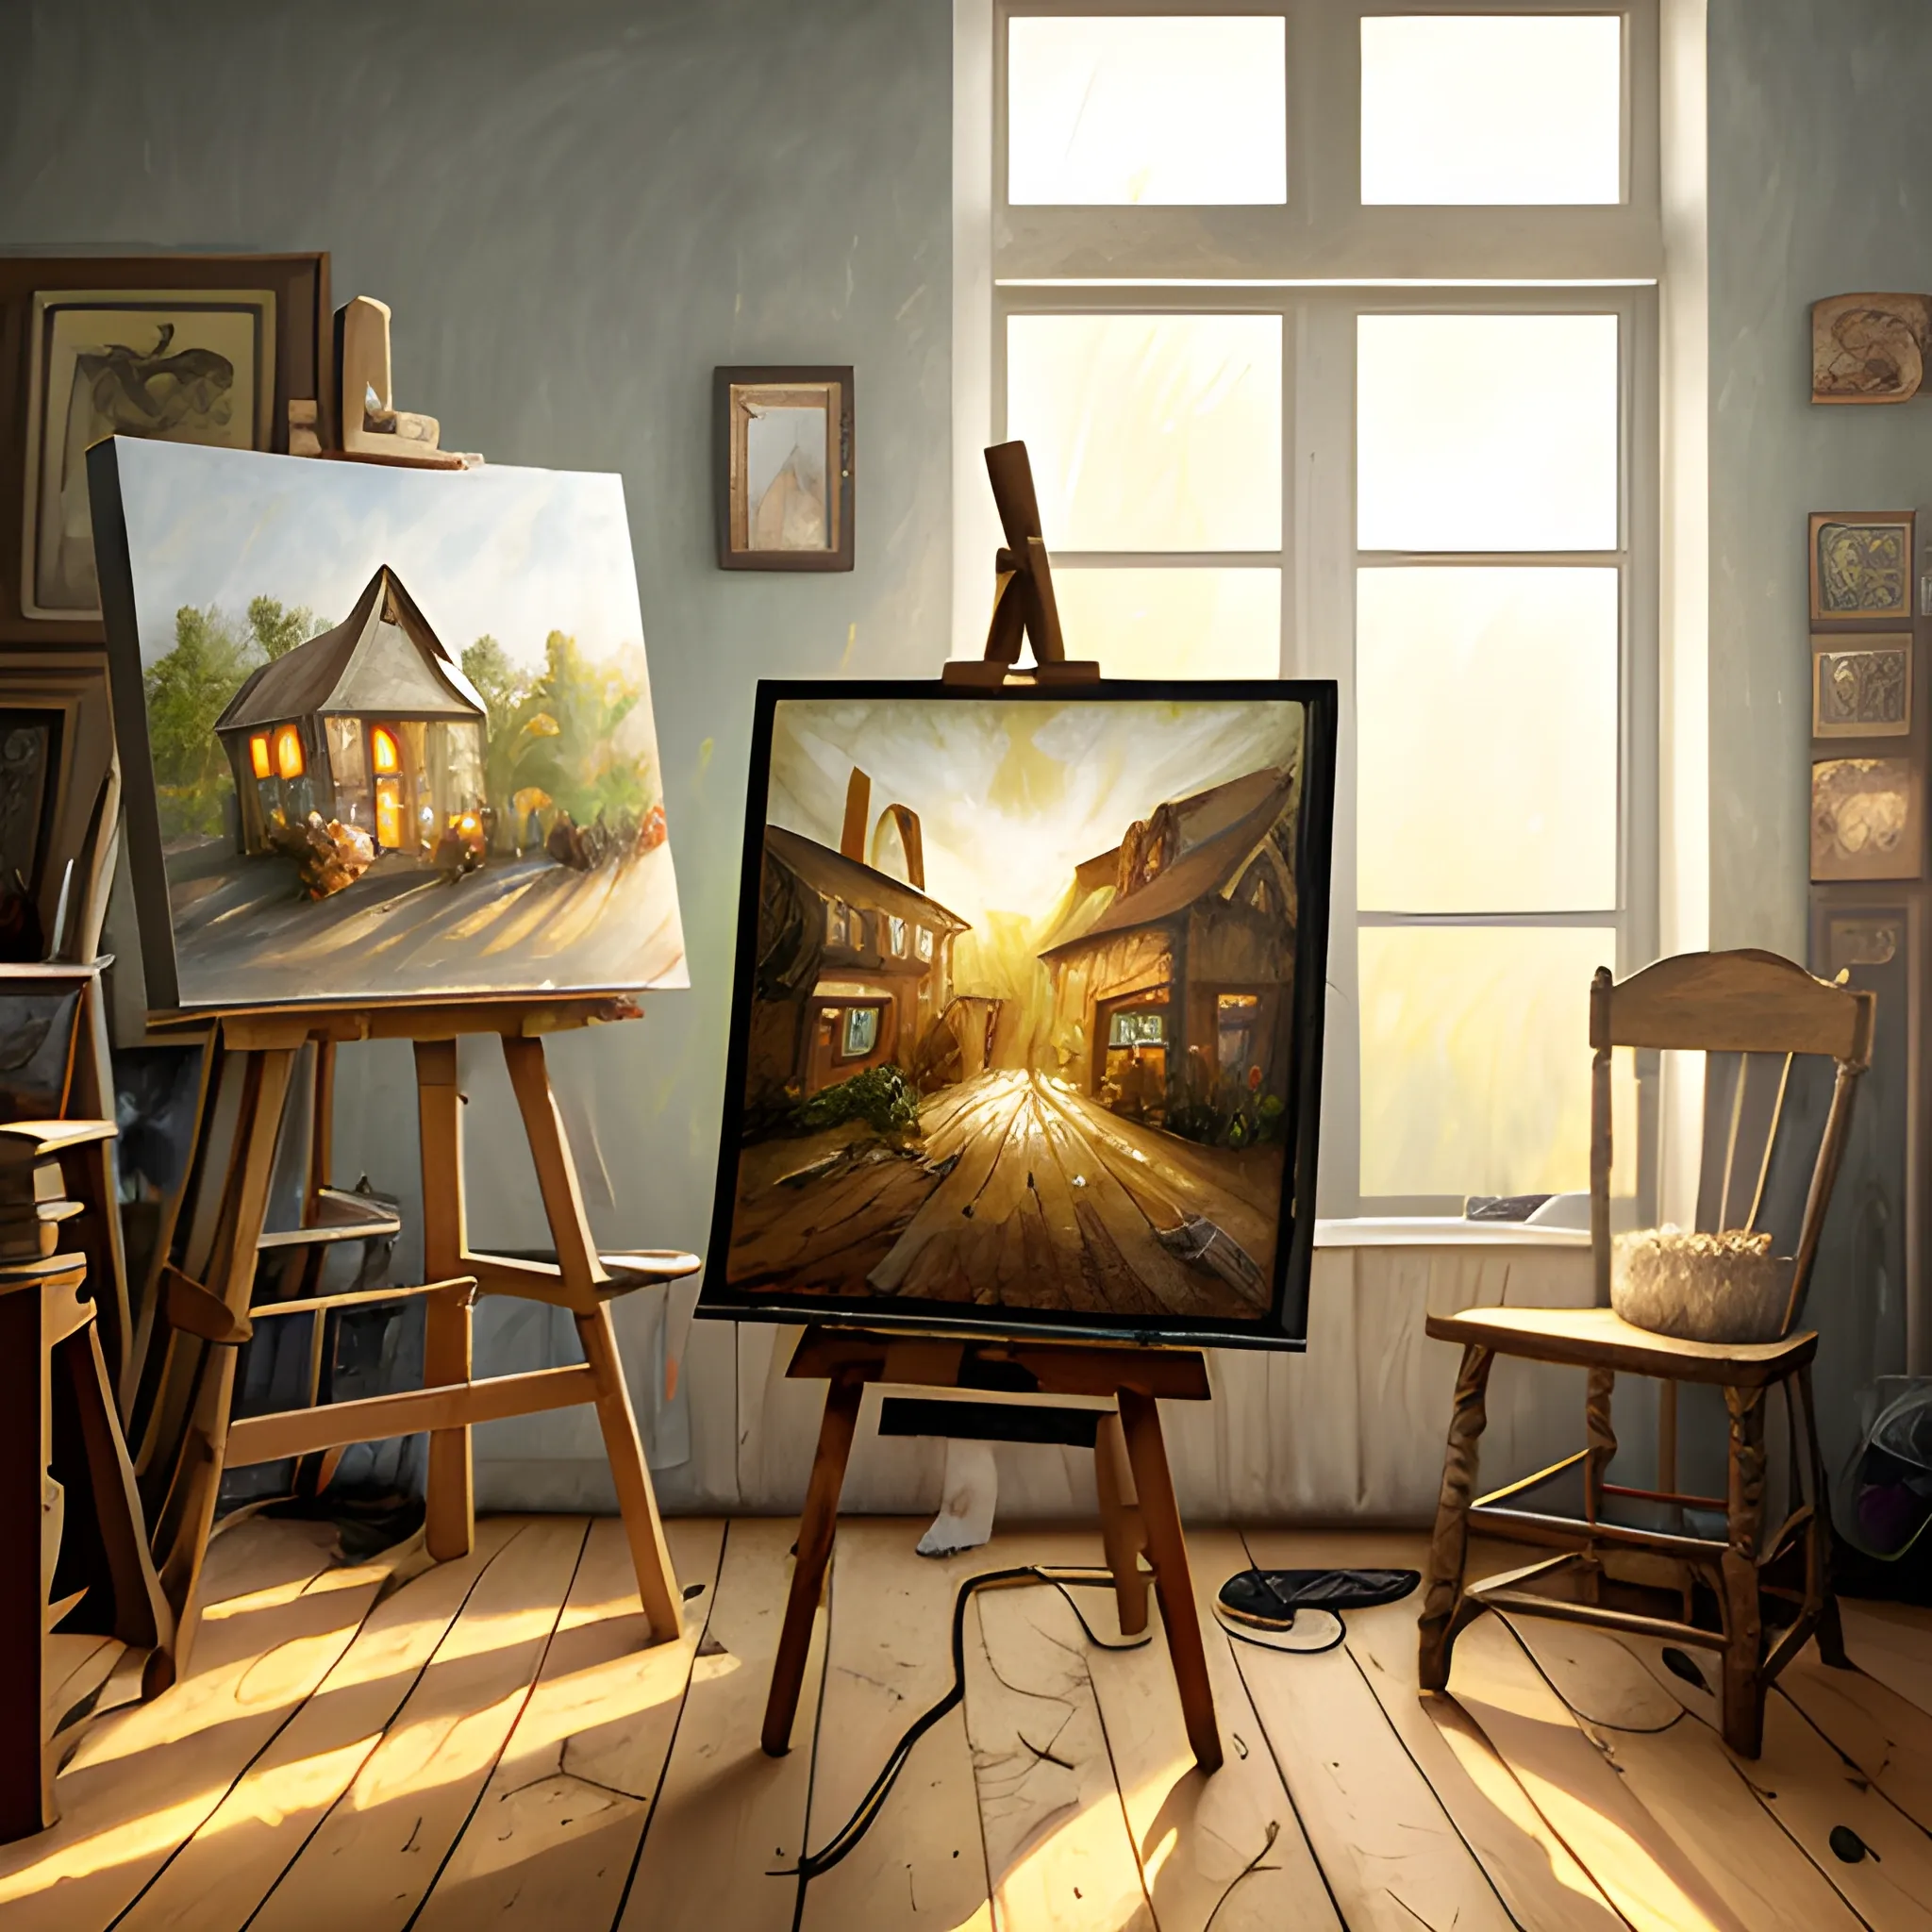 expressive rustic oil painting, interior view of a artist's studio, easel with painting in progresswaxy candles, cabinets, wood furnishings, herbs hanging, wood chair, light bloom, dust, paintings all round the room, very crowded, 
, ambient occlusion, morning, rays of light coming through windows, dim lighting, brush strokes oil painting